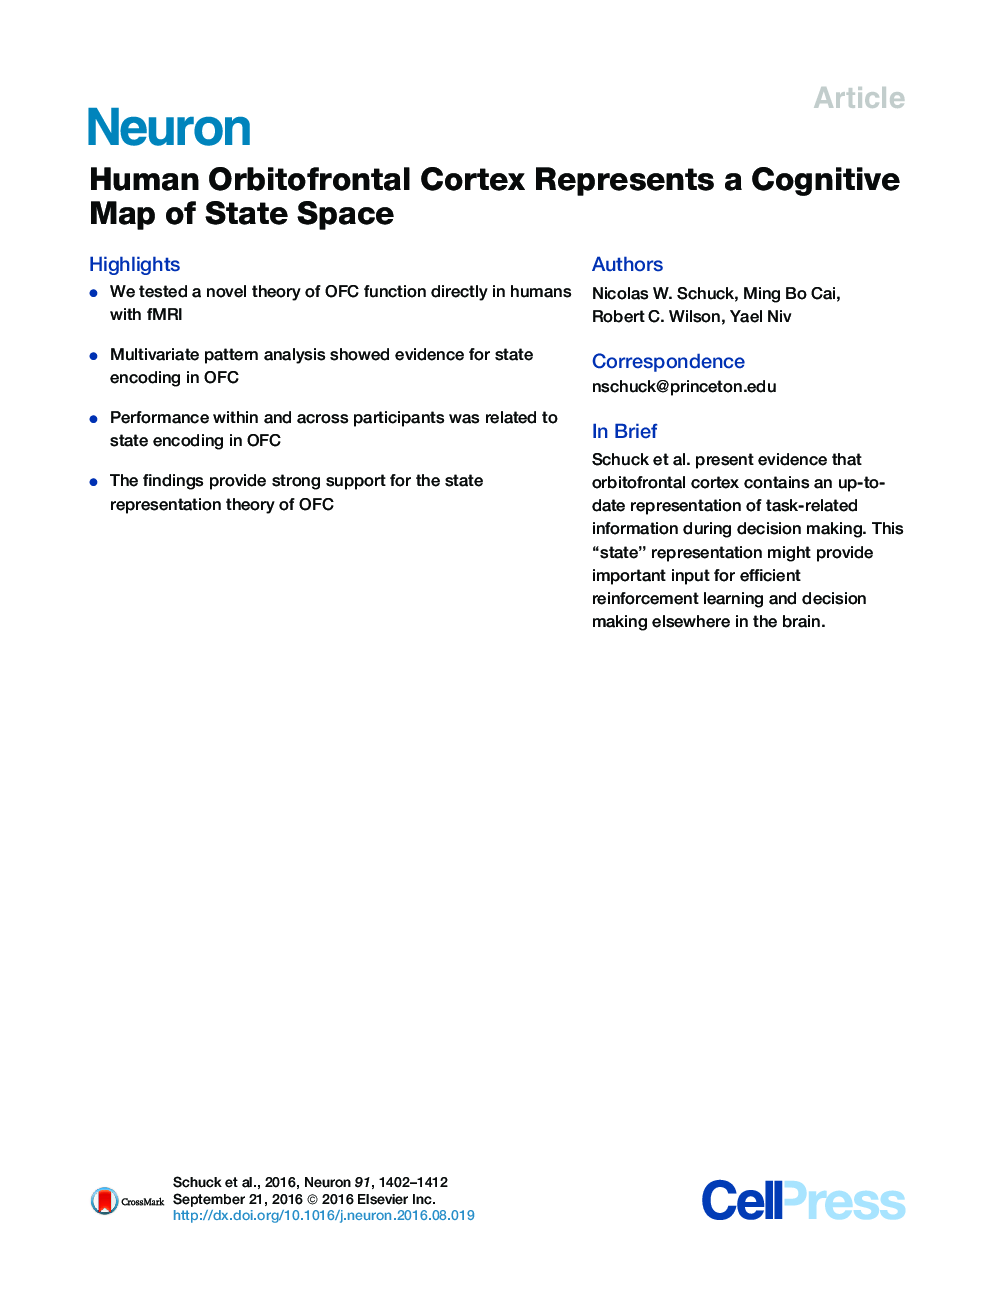 Human Orbitofrontal Cortex Represents a Cognitive Map of State Space